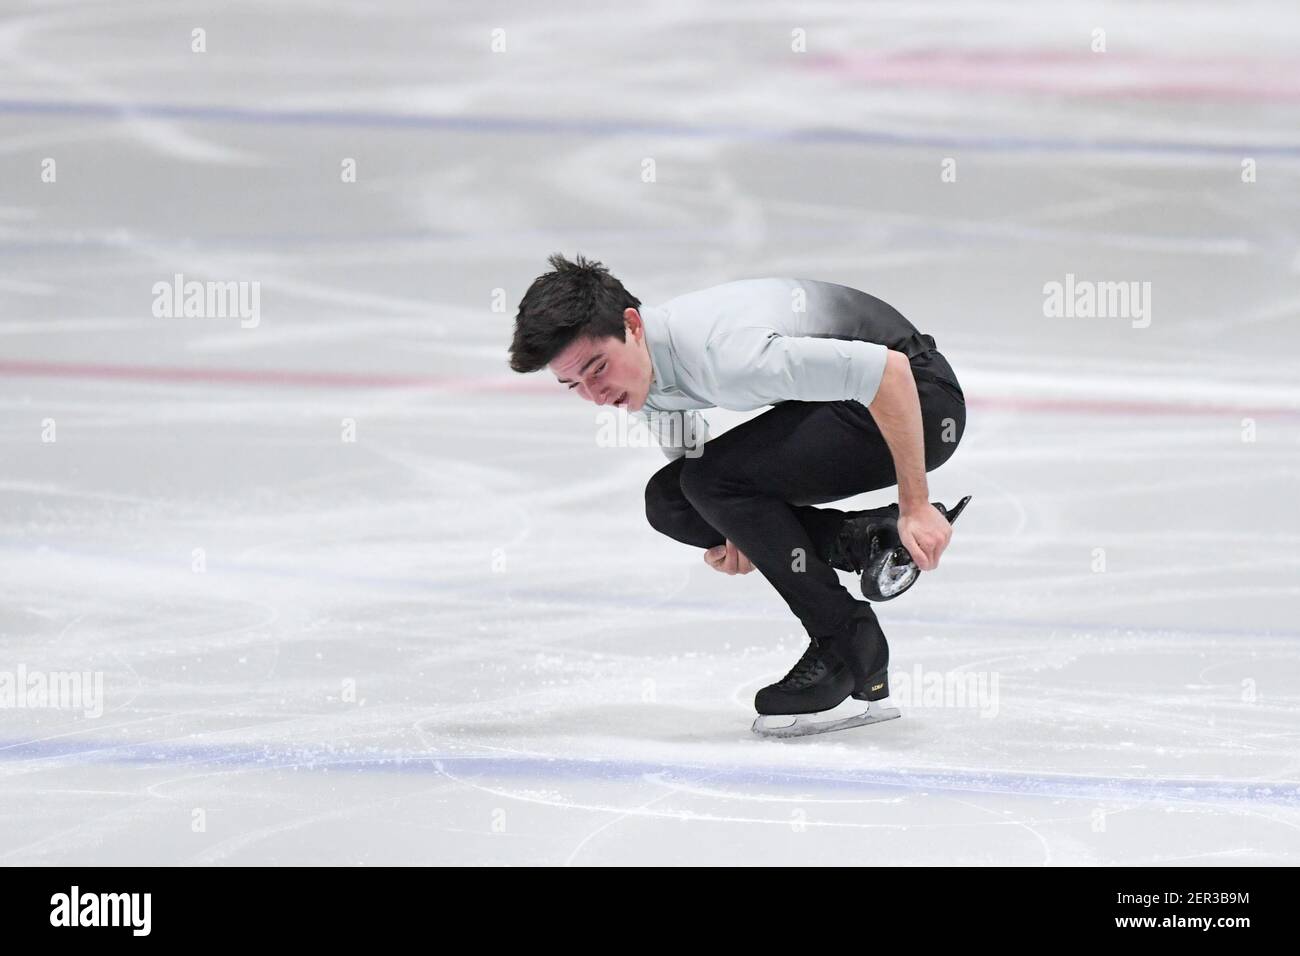 THE HAGUE, NETHERLANDS - FEBRUARY 28: Arnau Joly of Spain competes in the figure skating men's free skate program on Day 4 during the Challenge Cup 20 Stock Photo